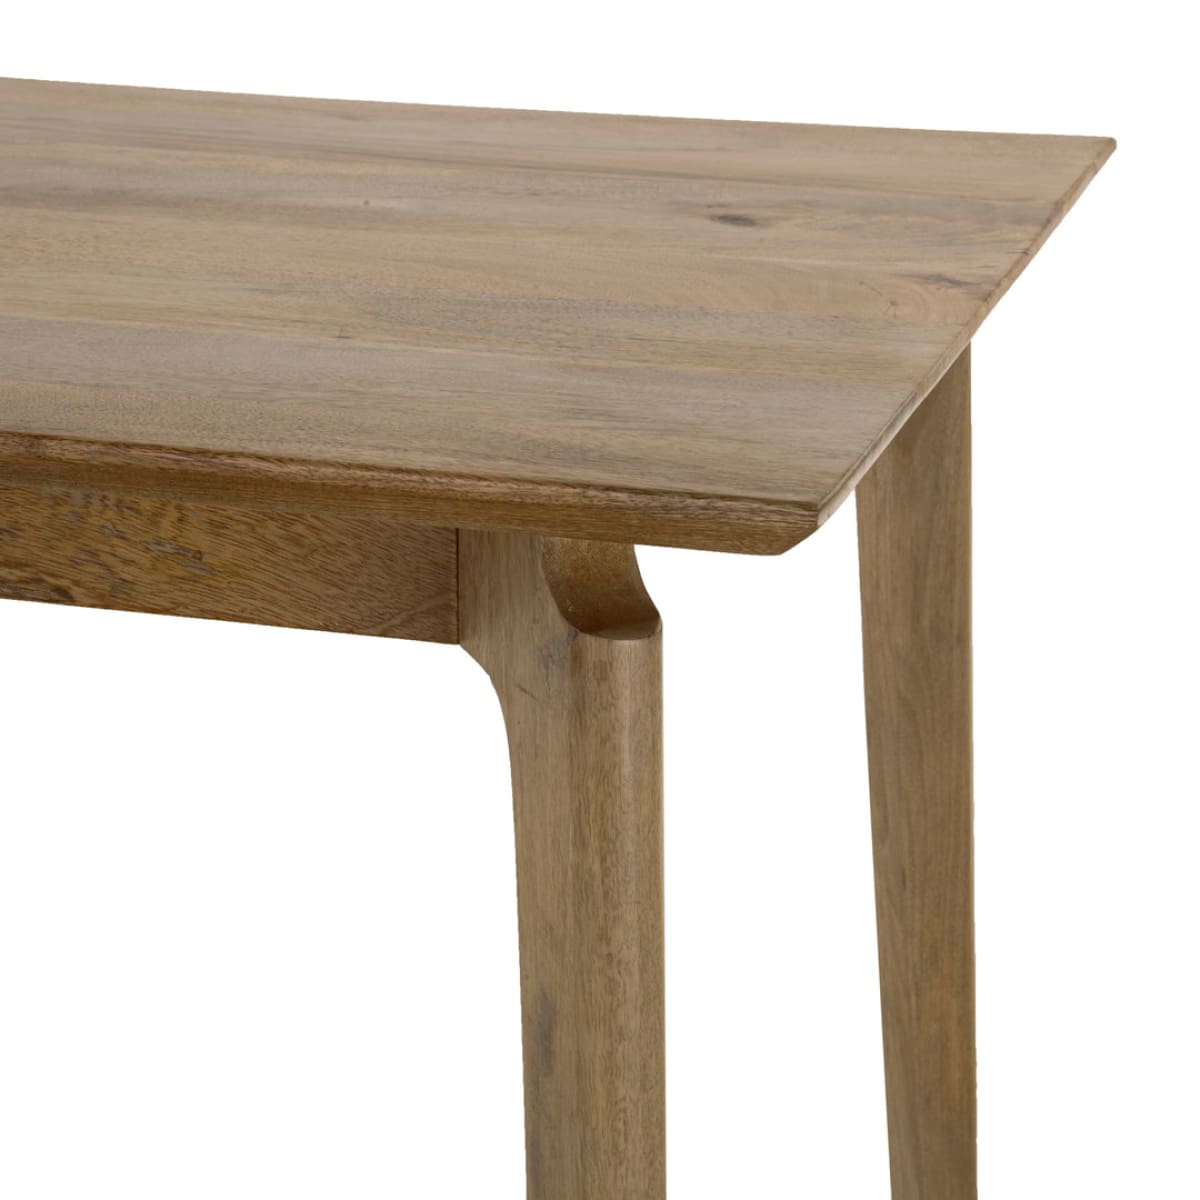 Kenzo Dining Table Small 60” – Natural - lh-import-dining-tables